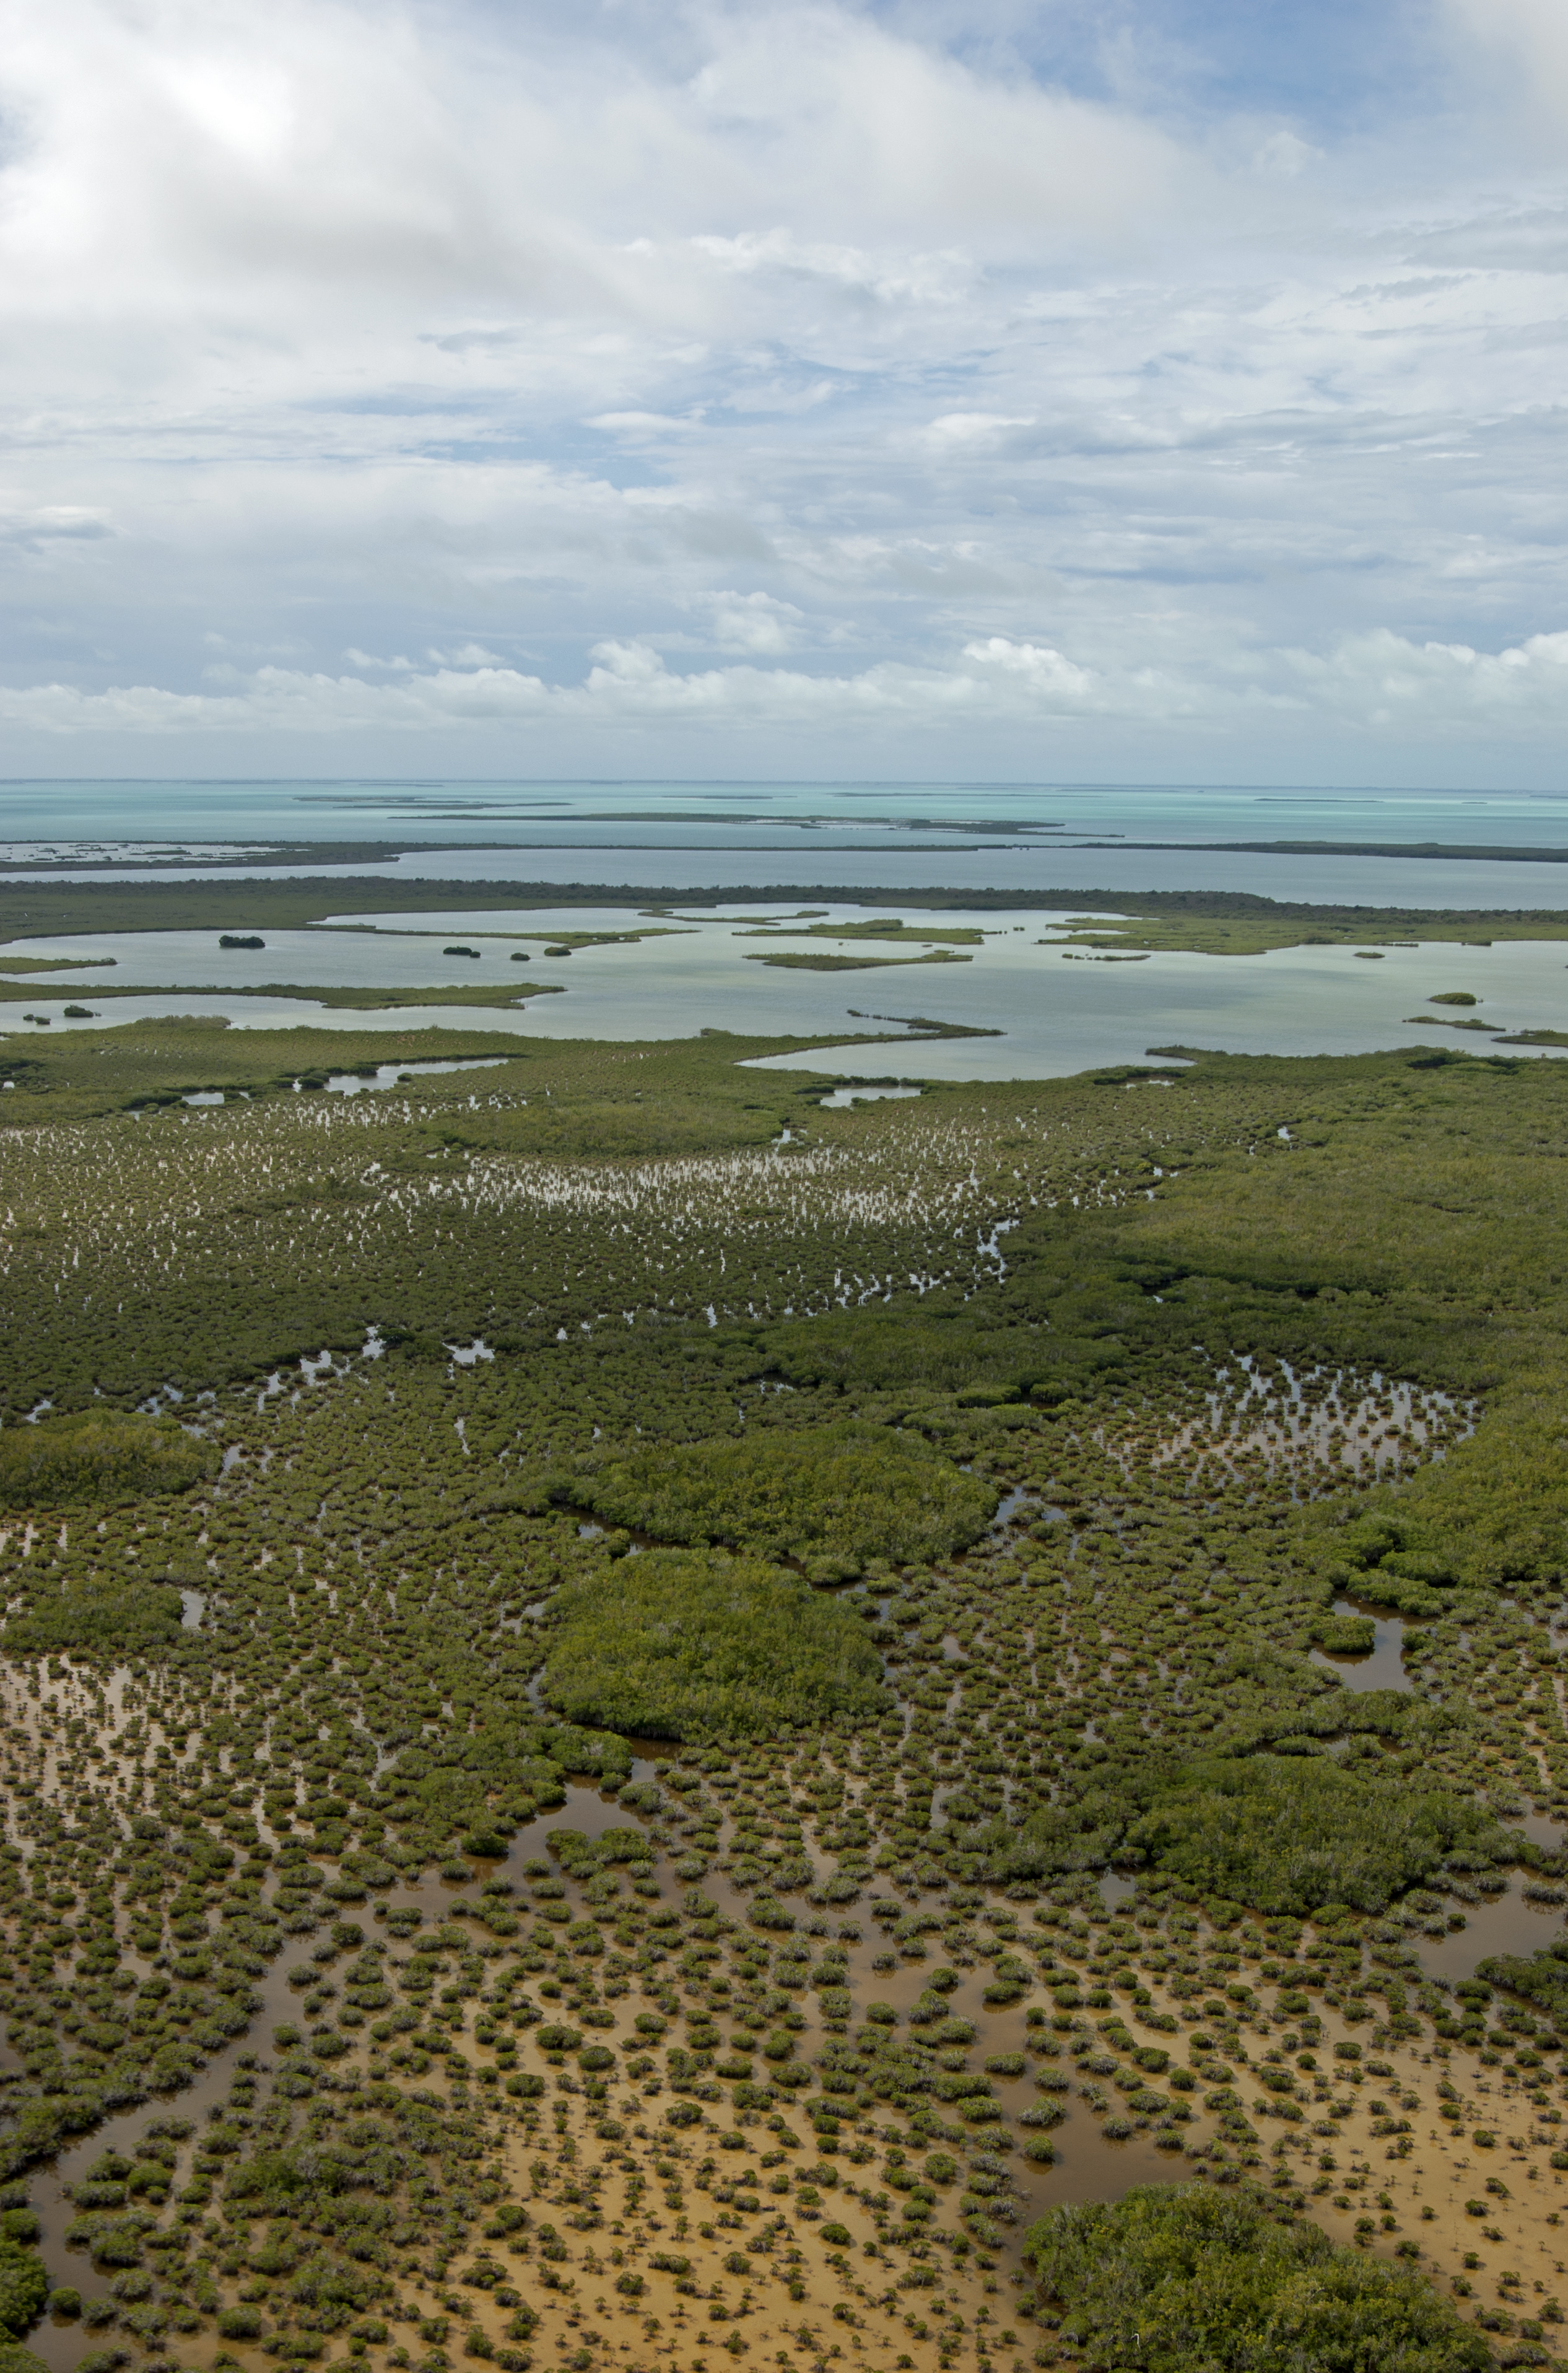 Aerial photo of the southern Everglades looking south towards Florida Bay